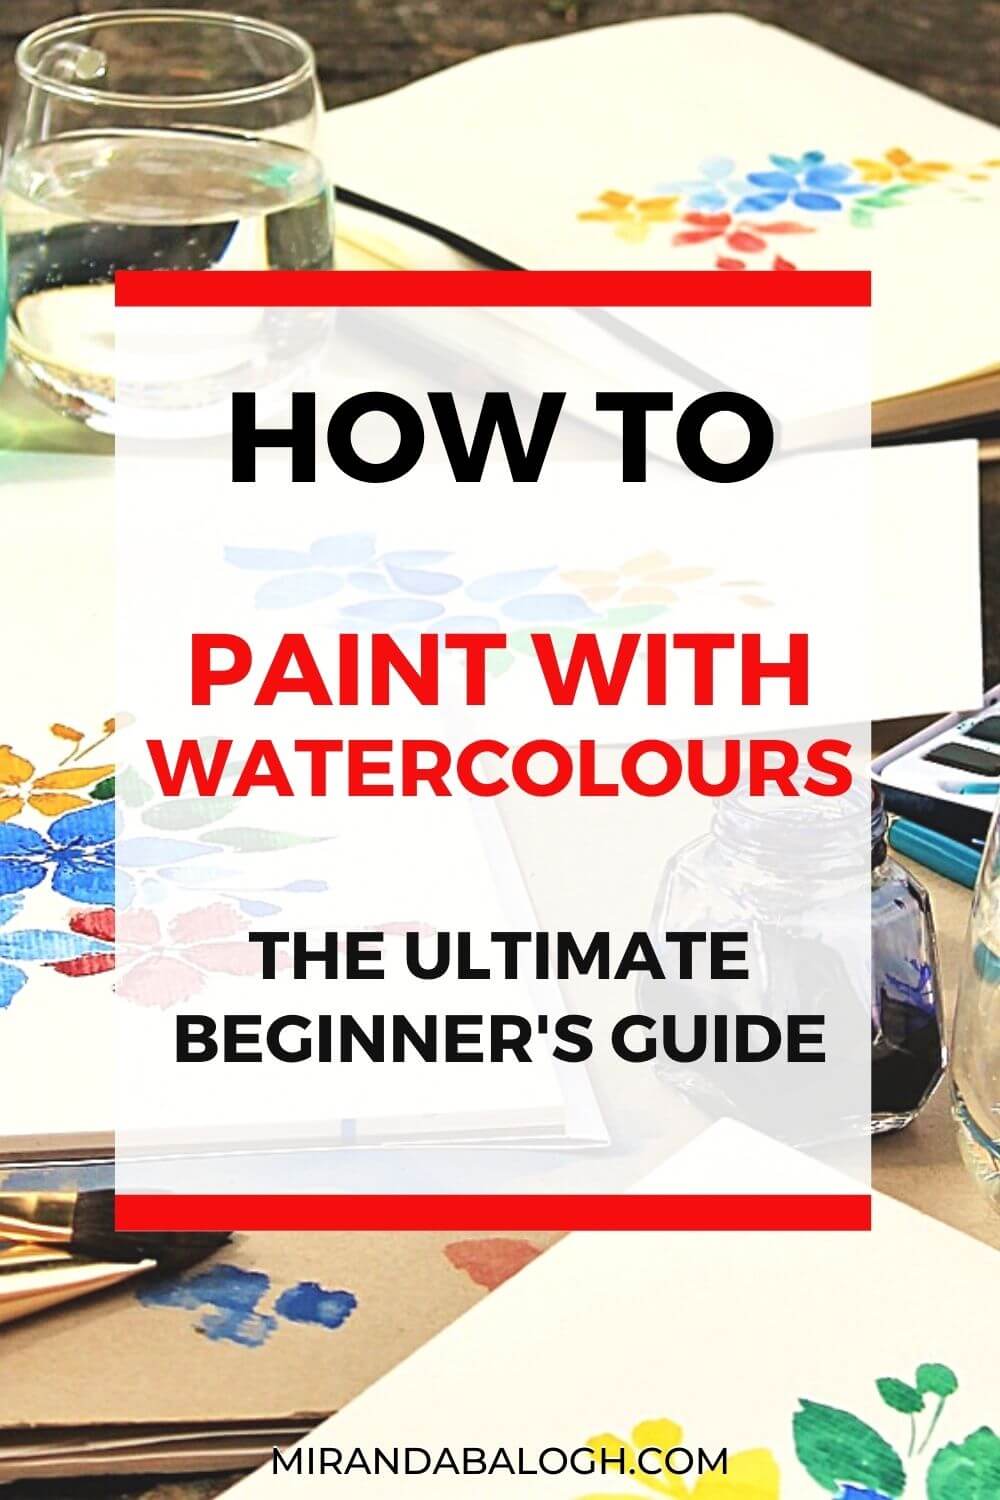 Click here to learn how to improve your watercolour artworks and watercolour illustrations! This ultimate guide will teach you how to purchase the best watercolour supplies, show you how to use different watercolour techniques, and give you watercolour drawing ideas that you can use in your art projects. Start making pretty watercolour paintings today! #watercolorartworks #watercolordrawingideas #watercolors